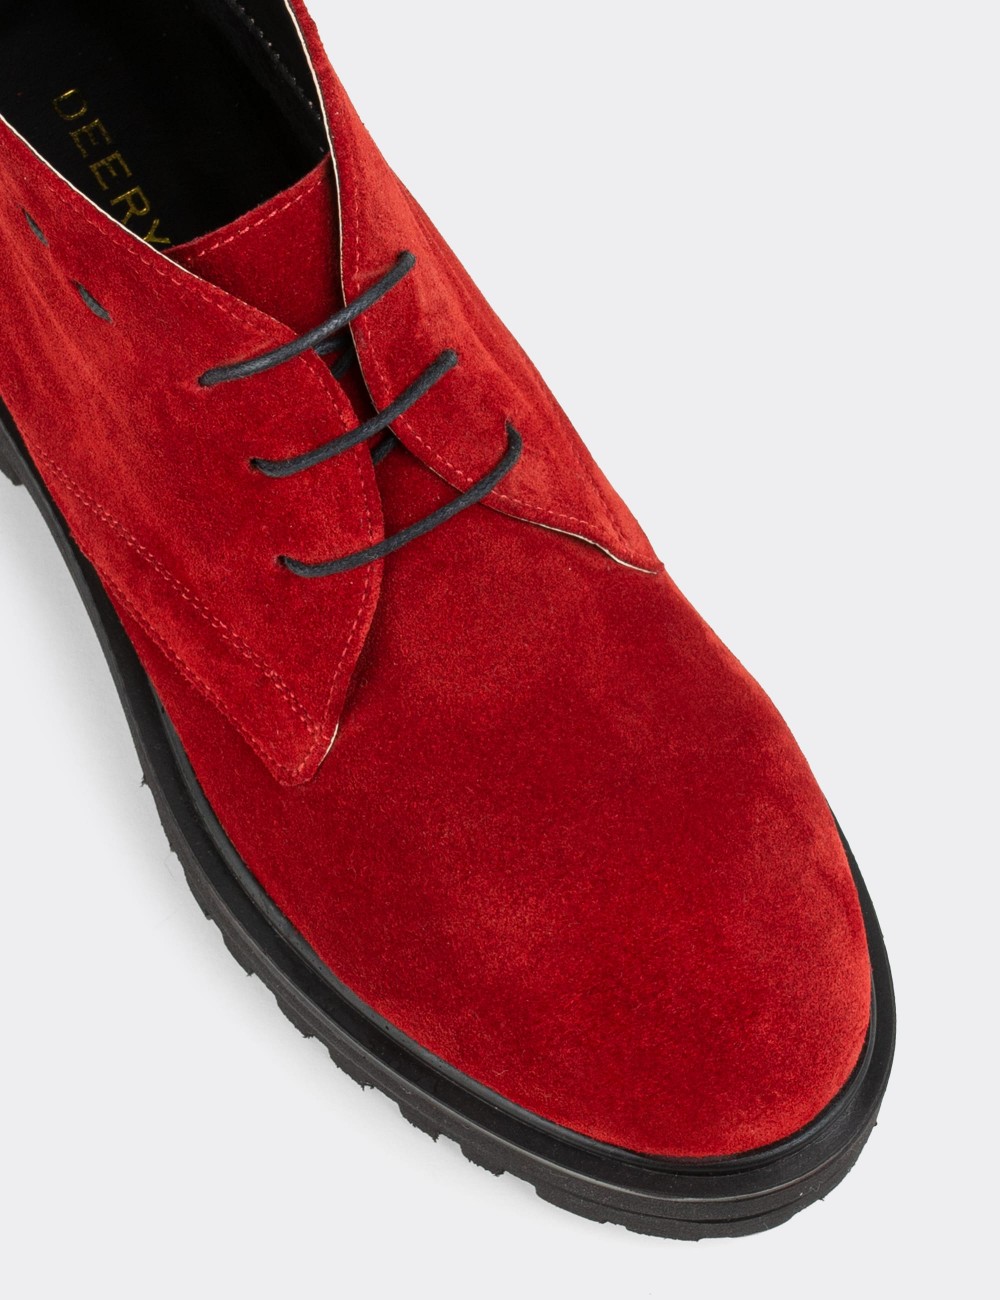 Red Suede Leather Desert Boots - 01847ZKRME01